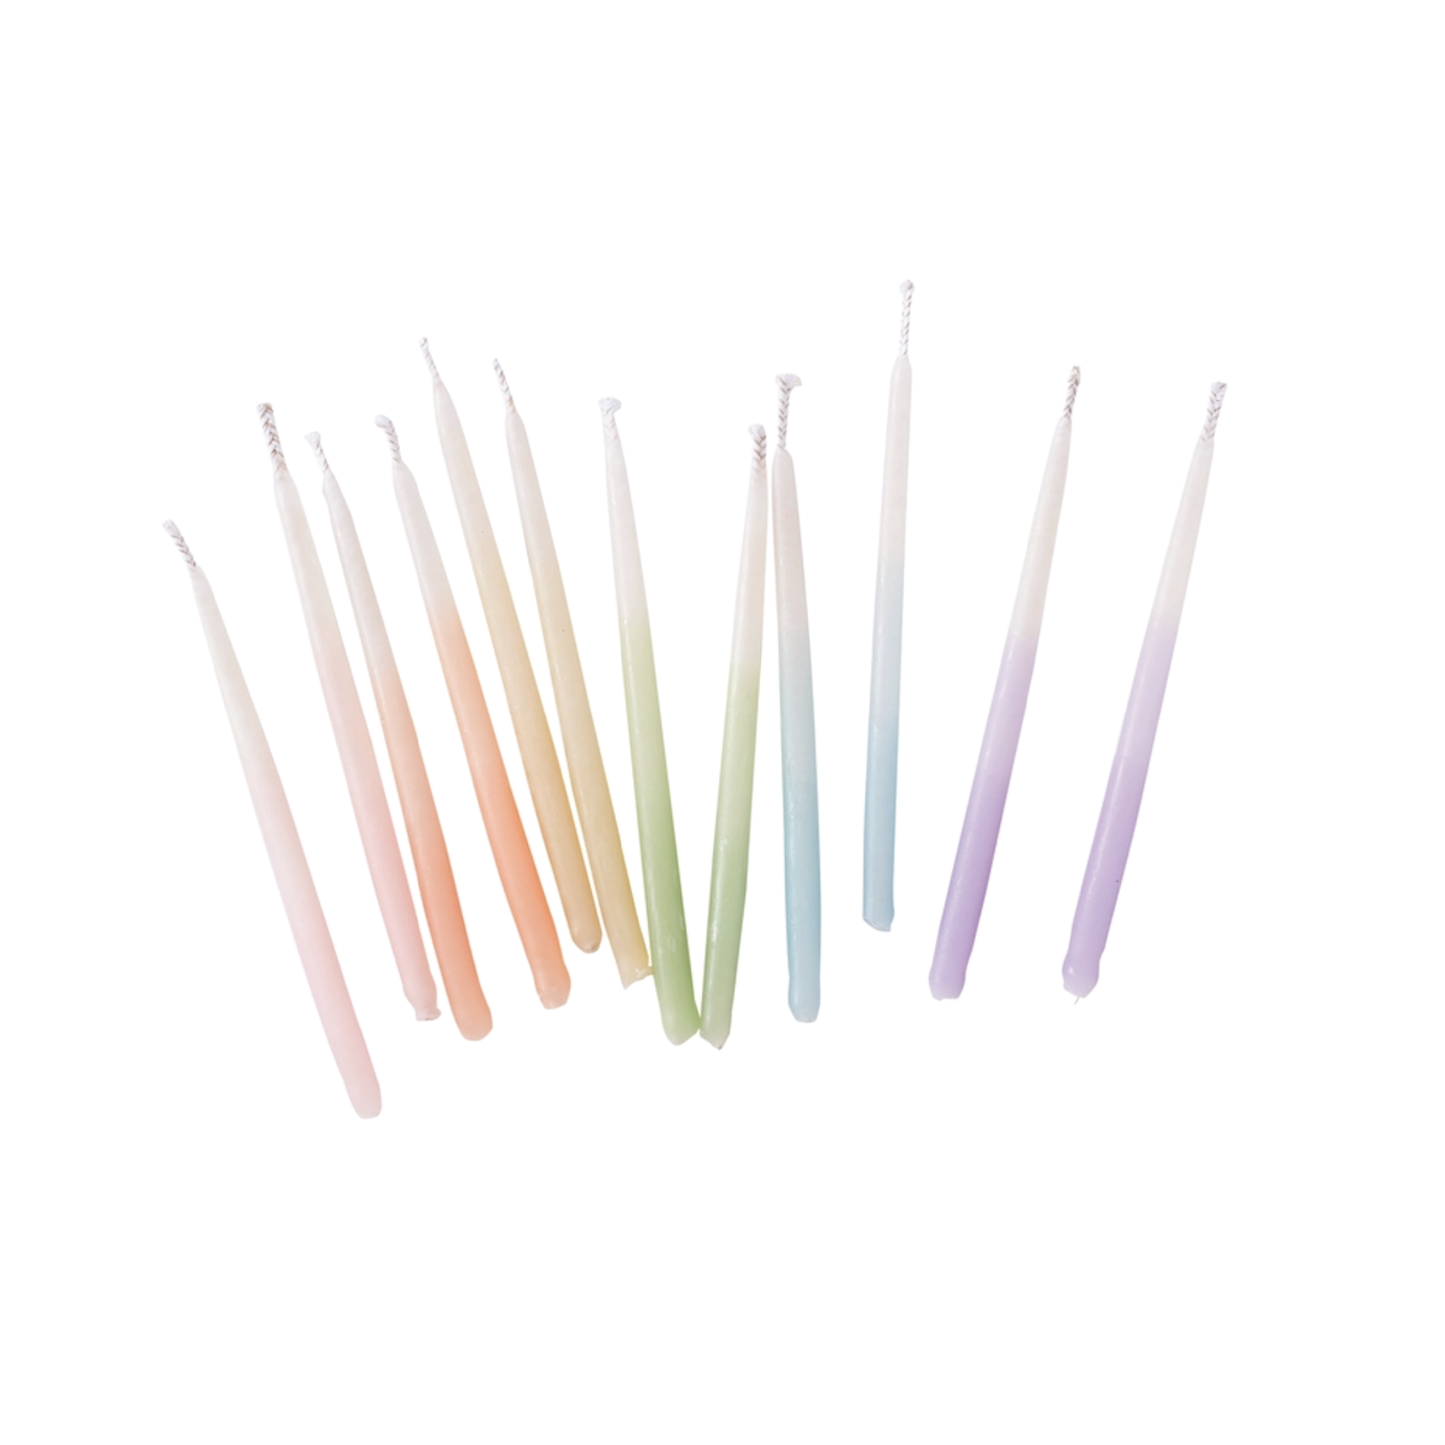 SALE - Assorted Ombre Beeswax Birthday Candles